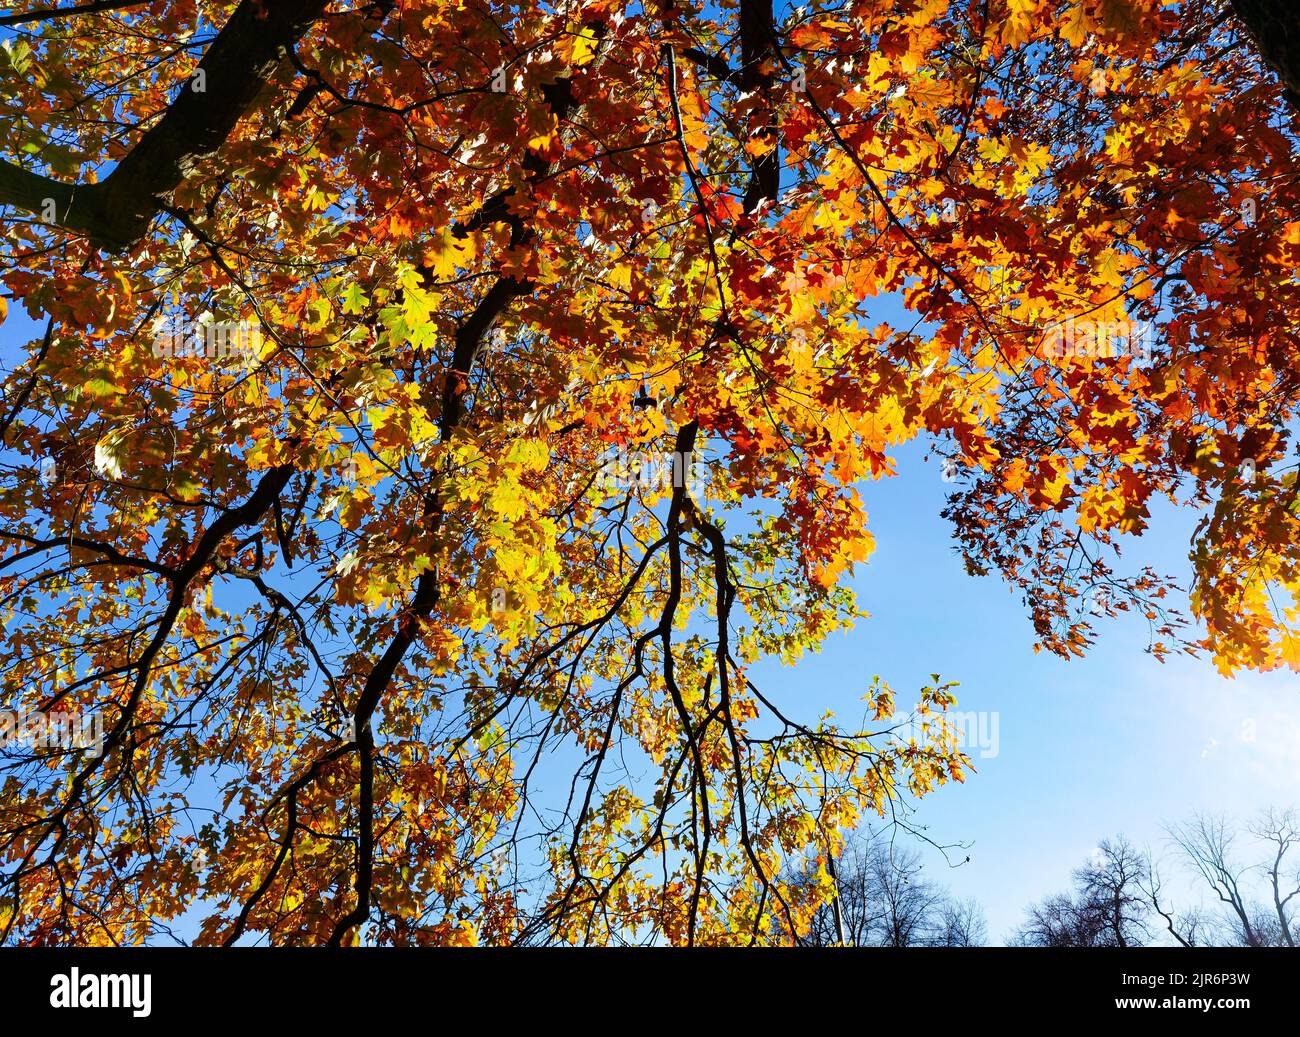 Changing leaves on a large Oak tree take on beautiful colors with the sun streaming through the foliage in the Fall Season. Stock Photo